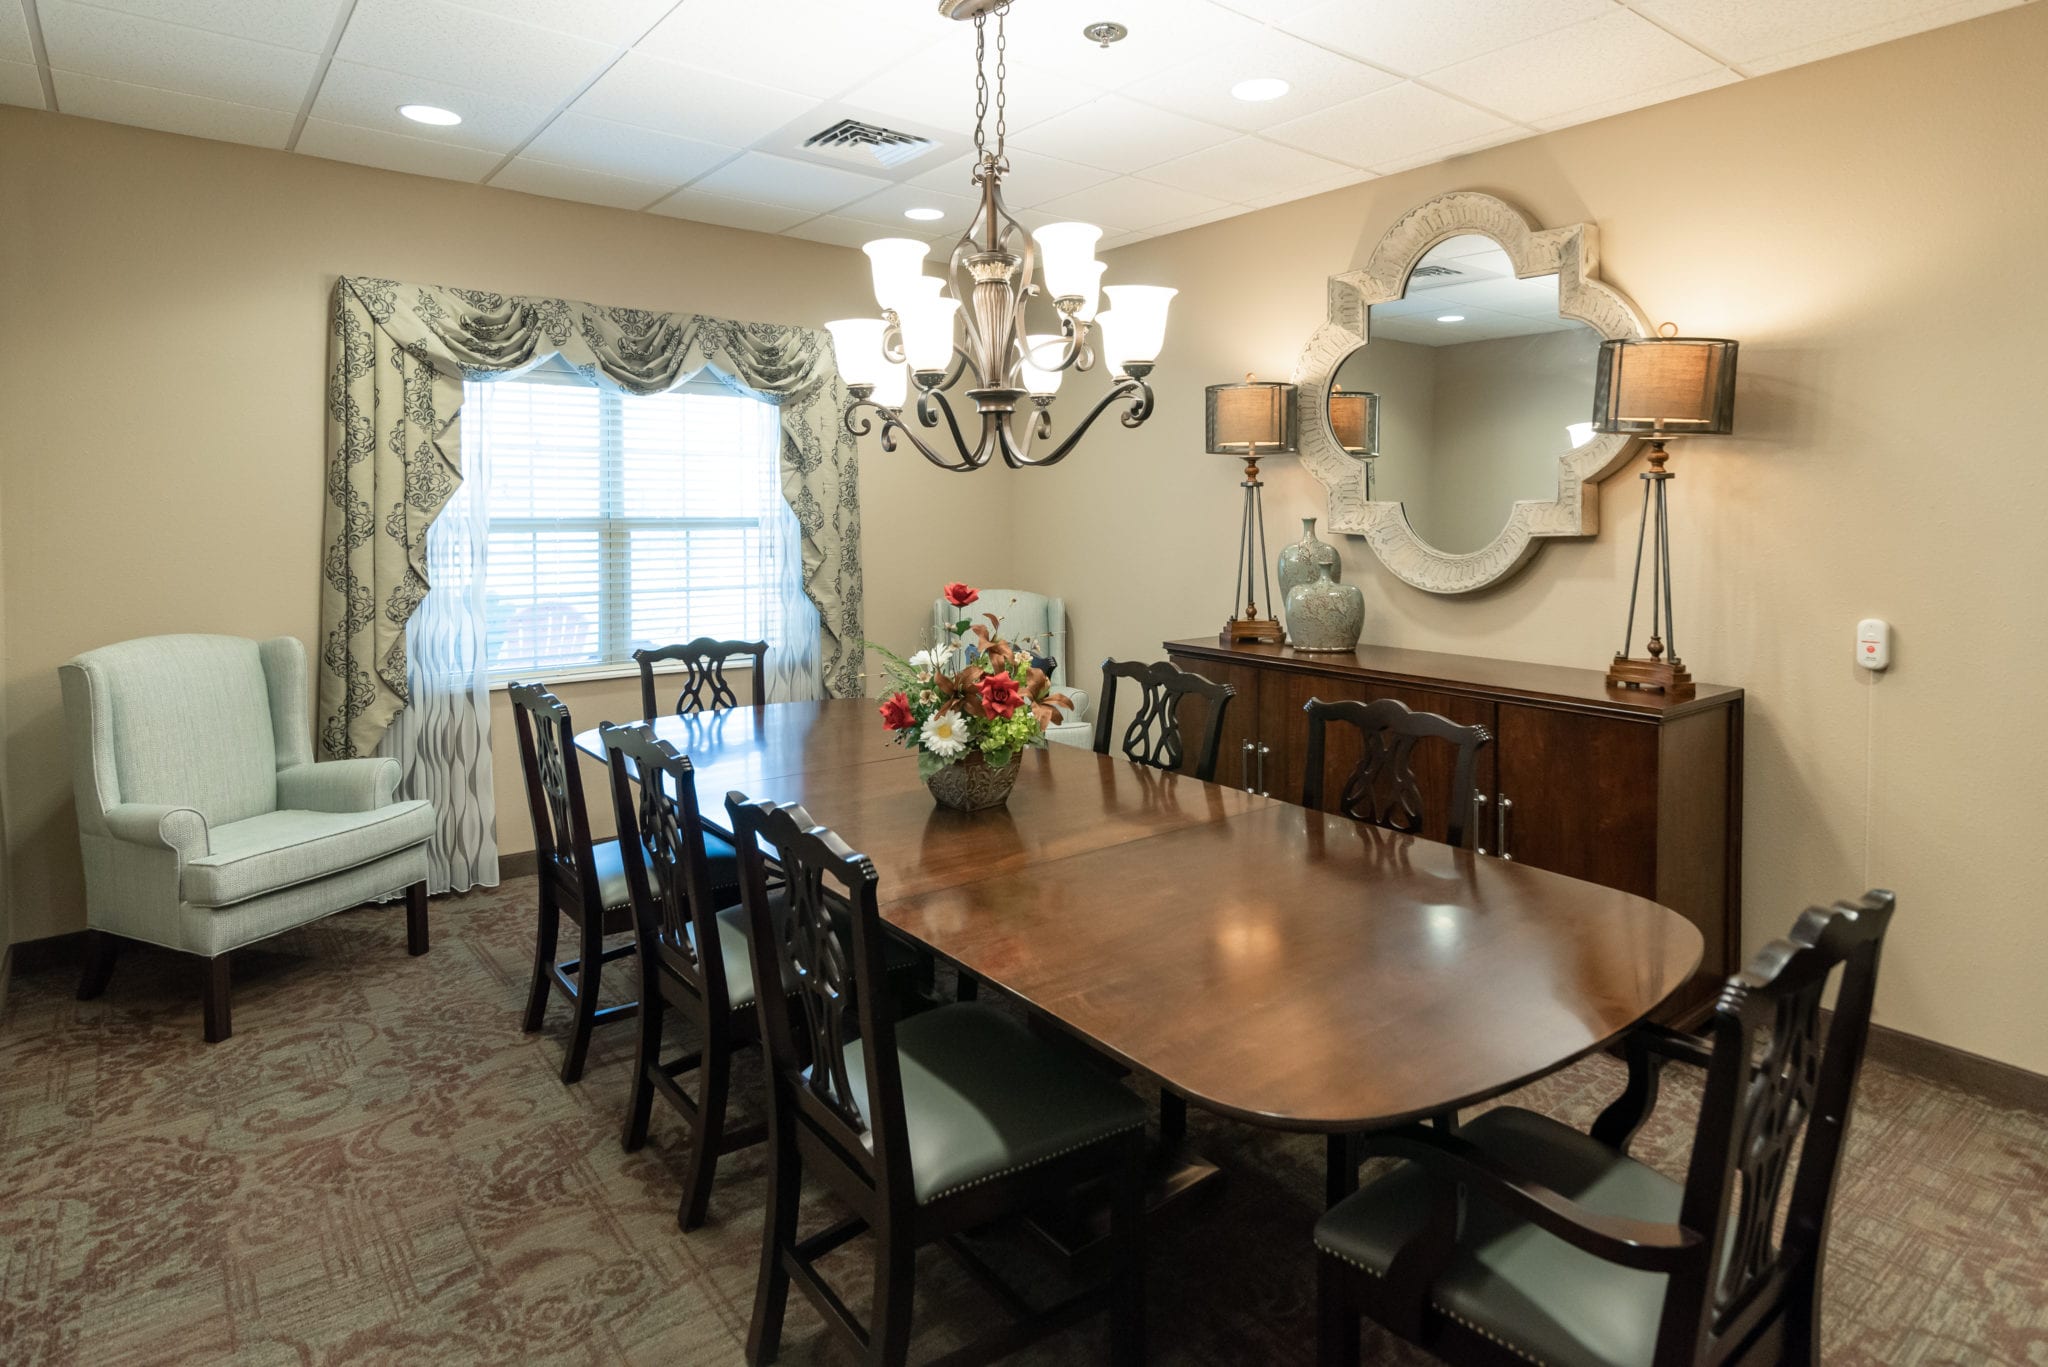 A dining table and chairs highlights the excellent dining options at Culpepper Place